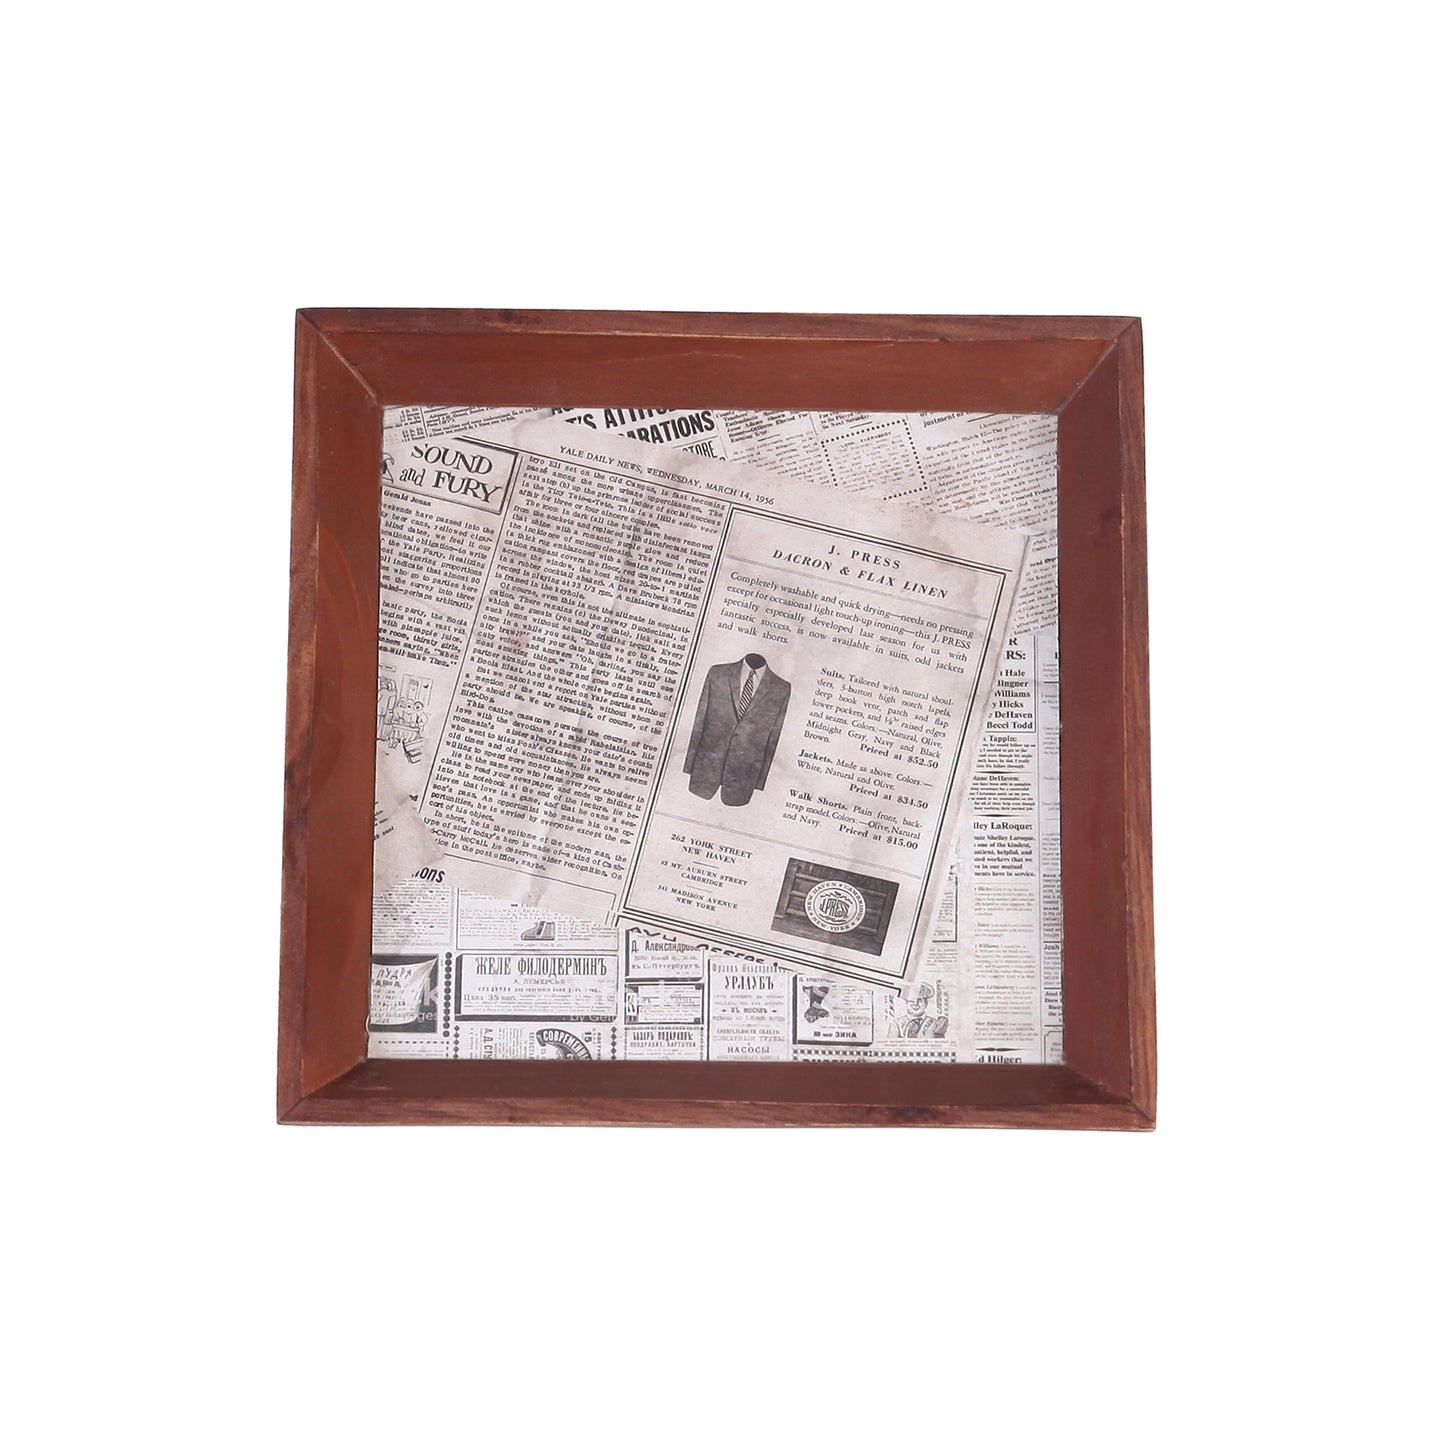 A Tiny Mistake Vintage Newspaper Small Square Wooden Serving Tray, 18 x 18 x 2 cm